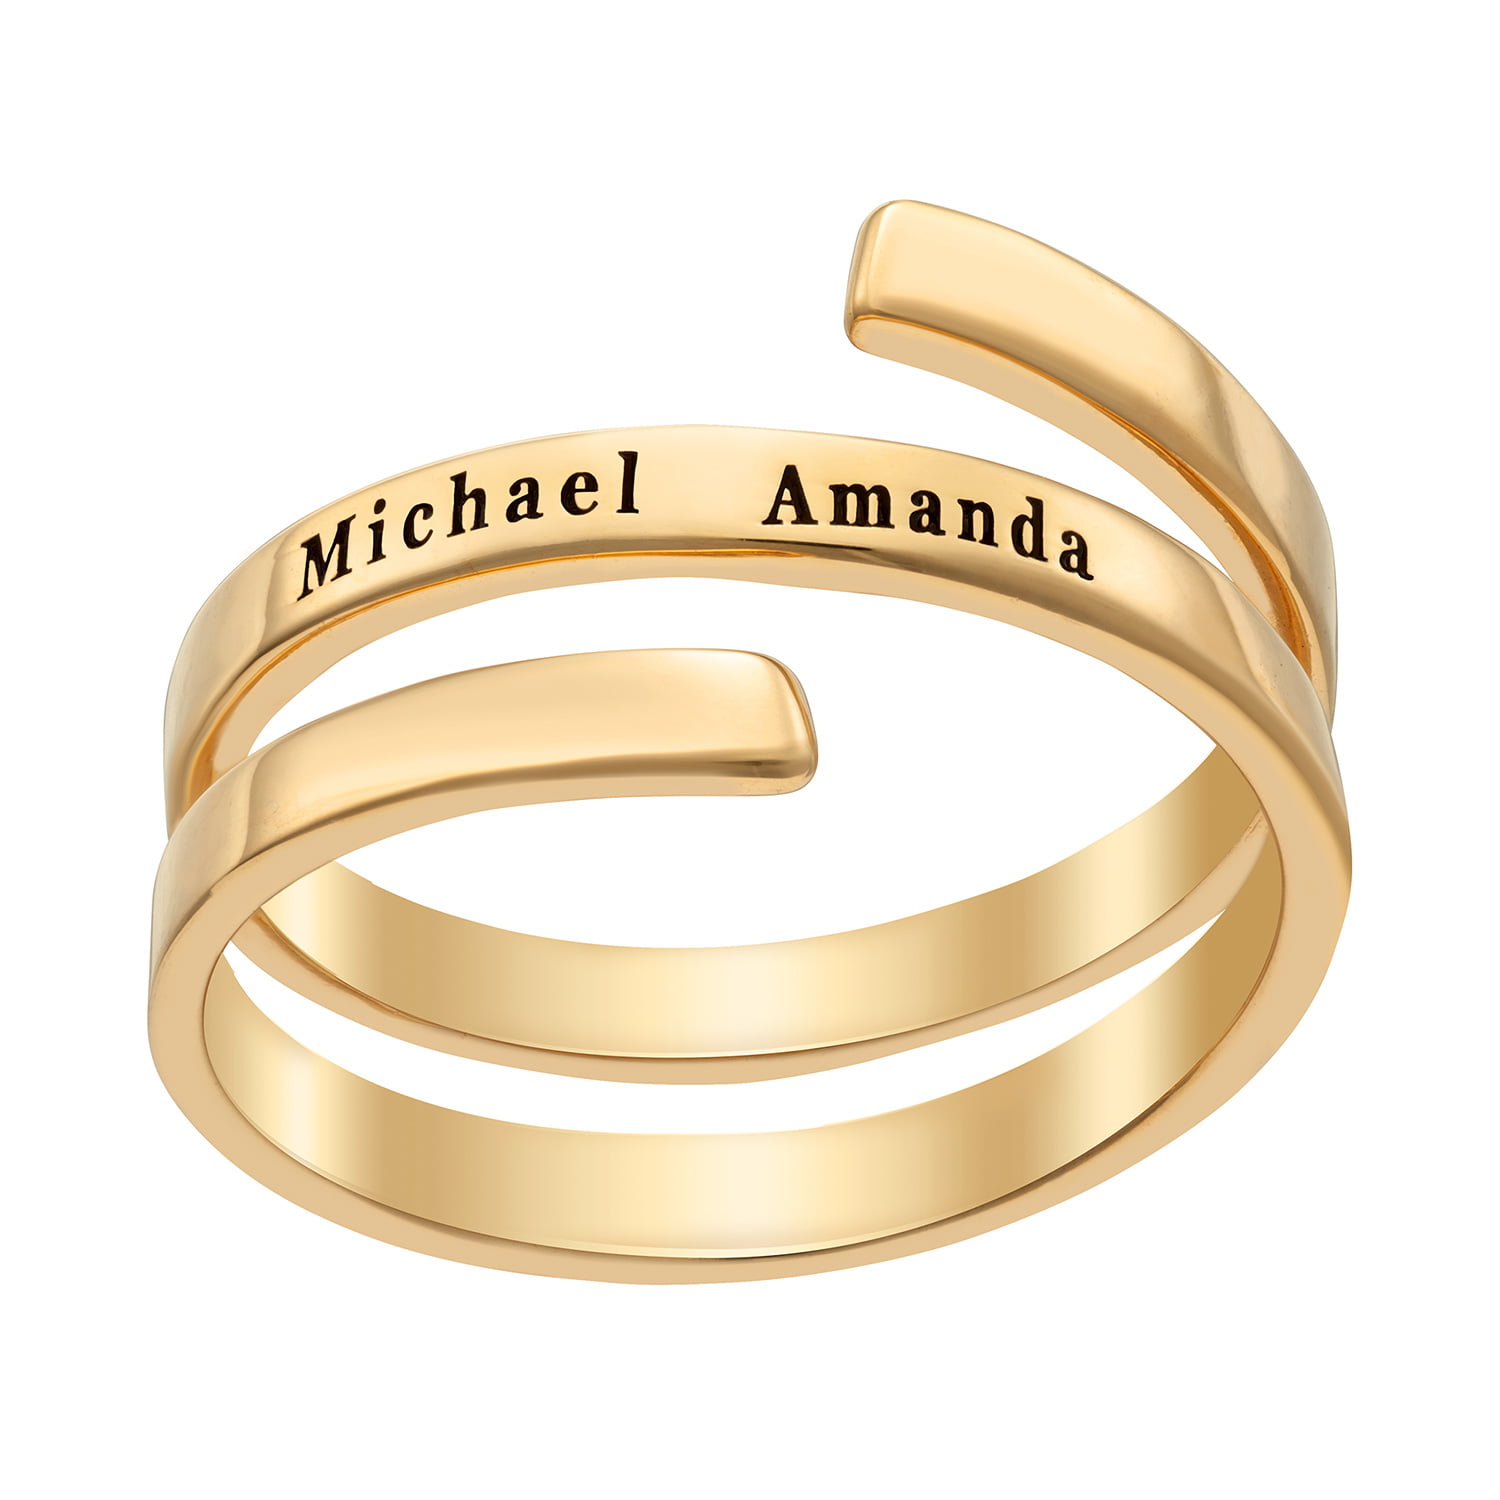 Personalized Planet Jewelry Personalized Women S Sterling Silver Or Gold Over Silver Engraved Double Name Bypass Ring Walmart Com Walmart Com